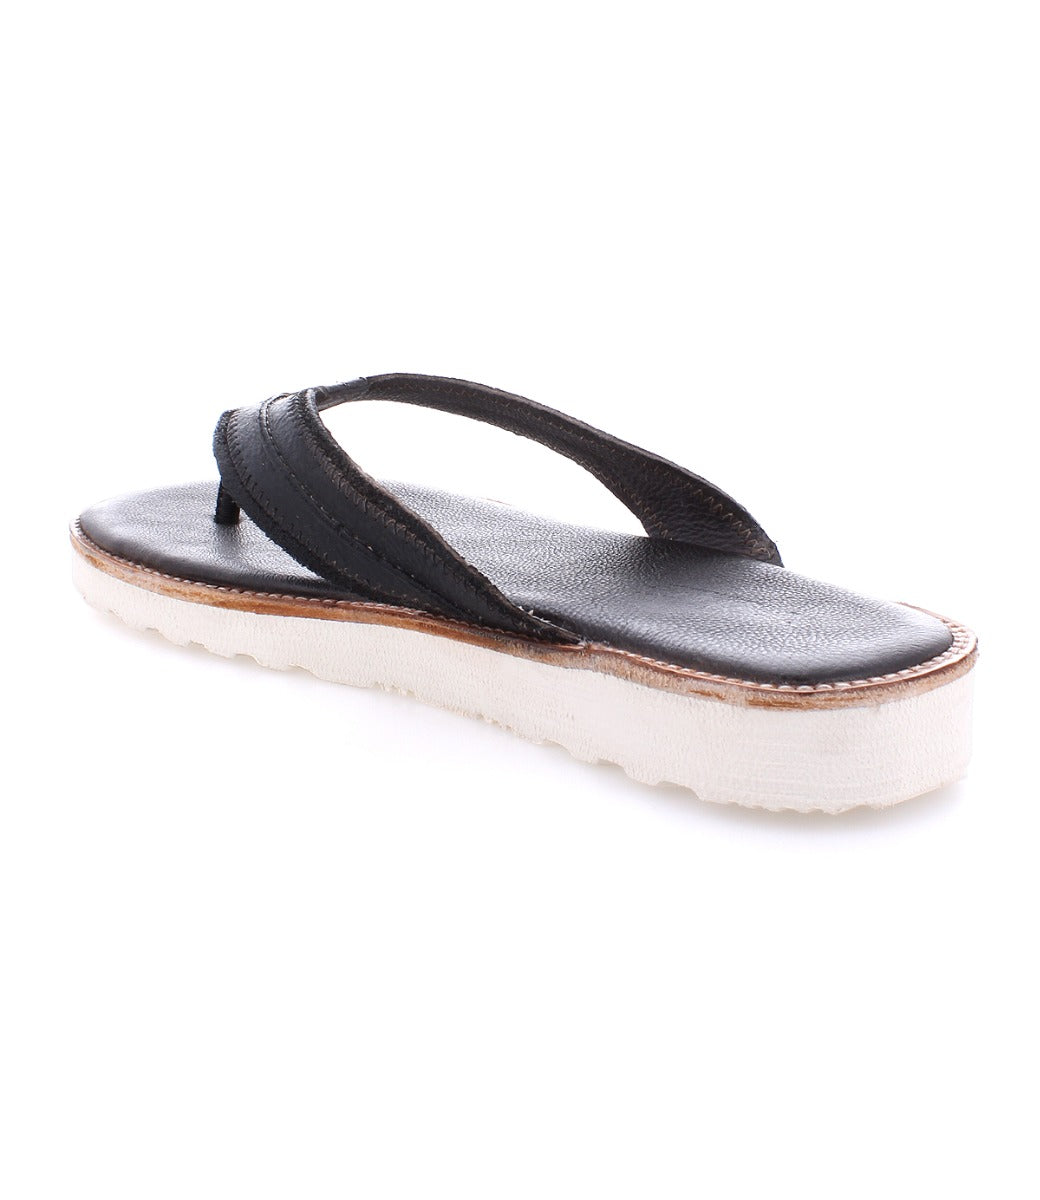 A pair of Bed Stu Elias Light flip flops on a white background.